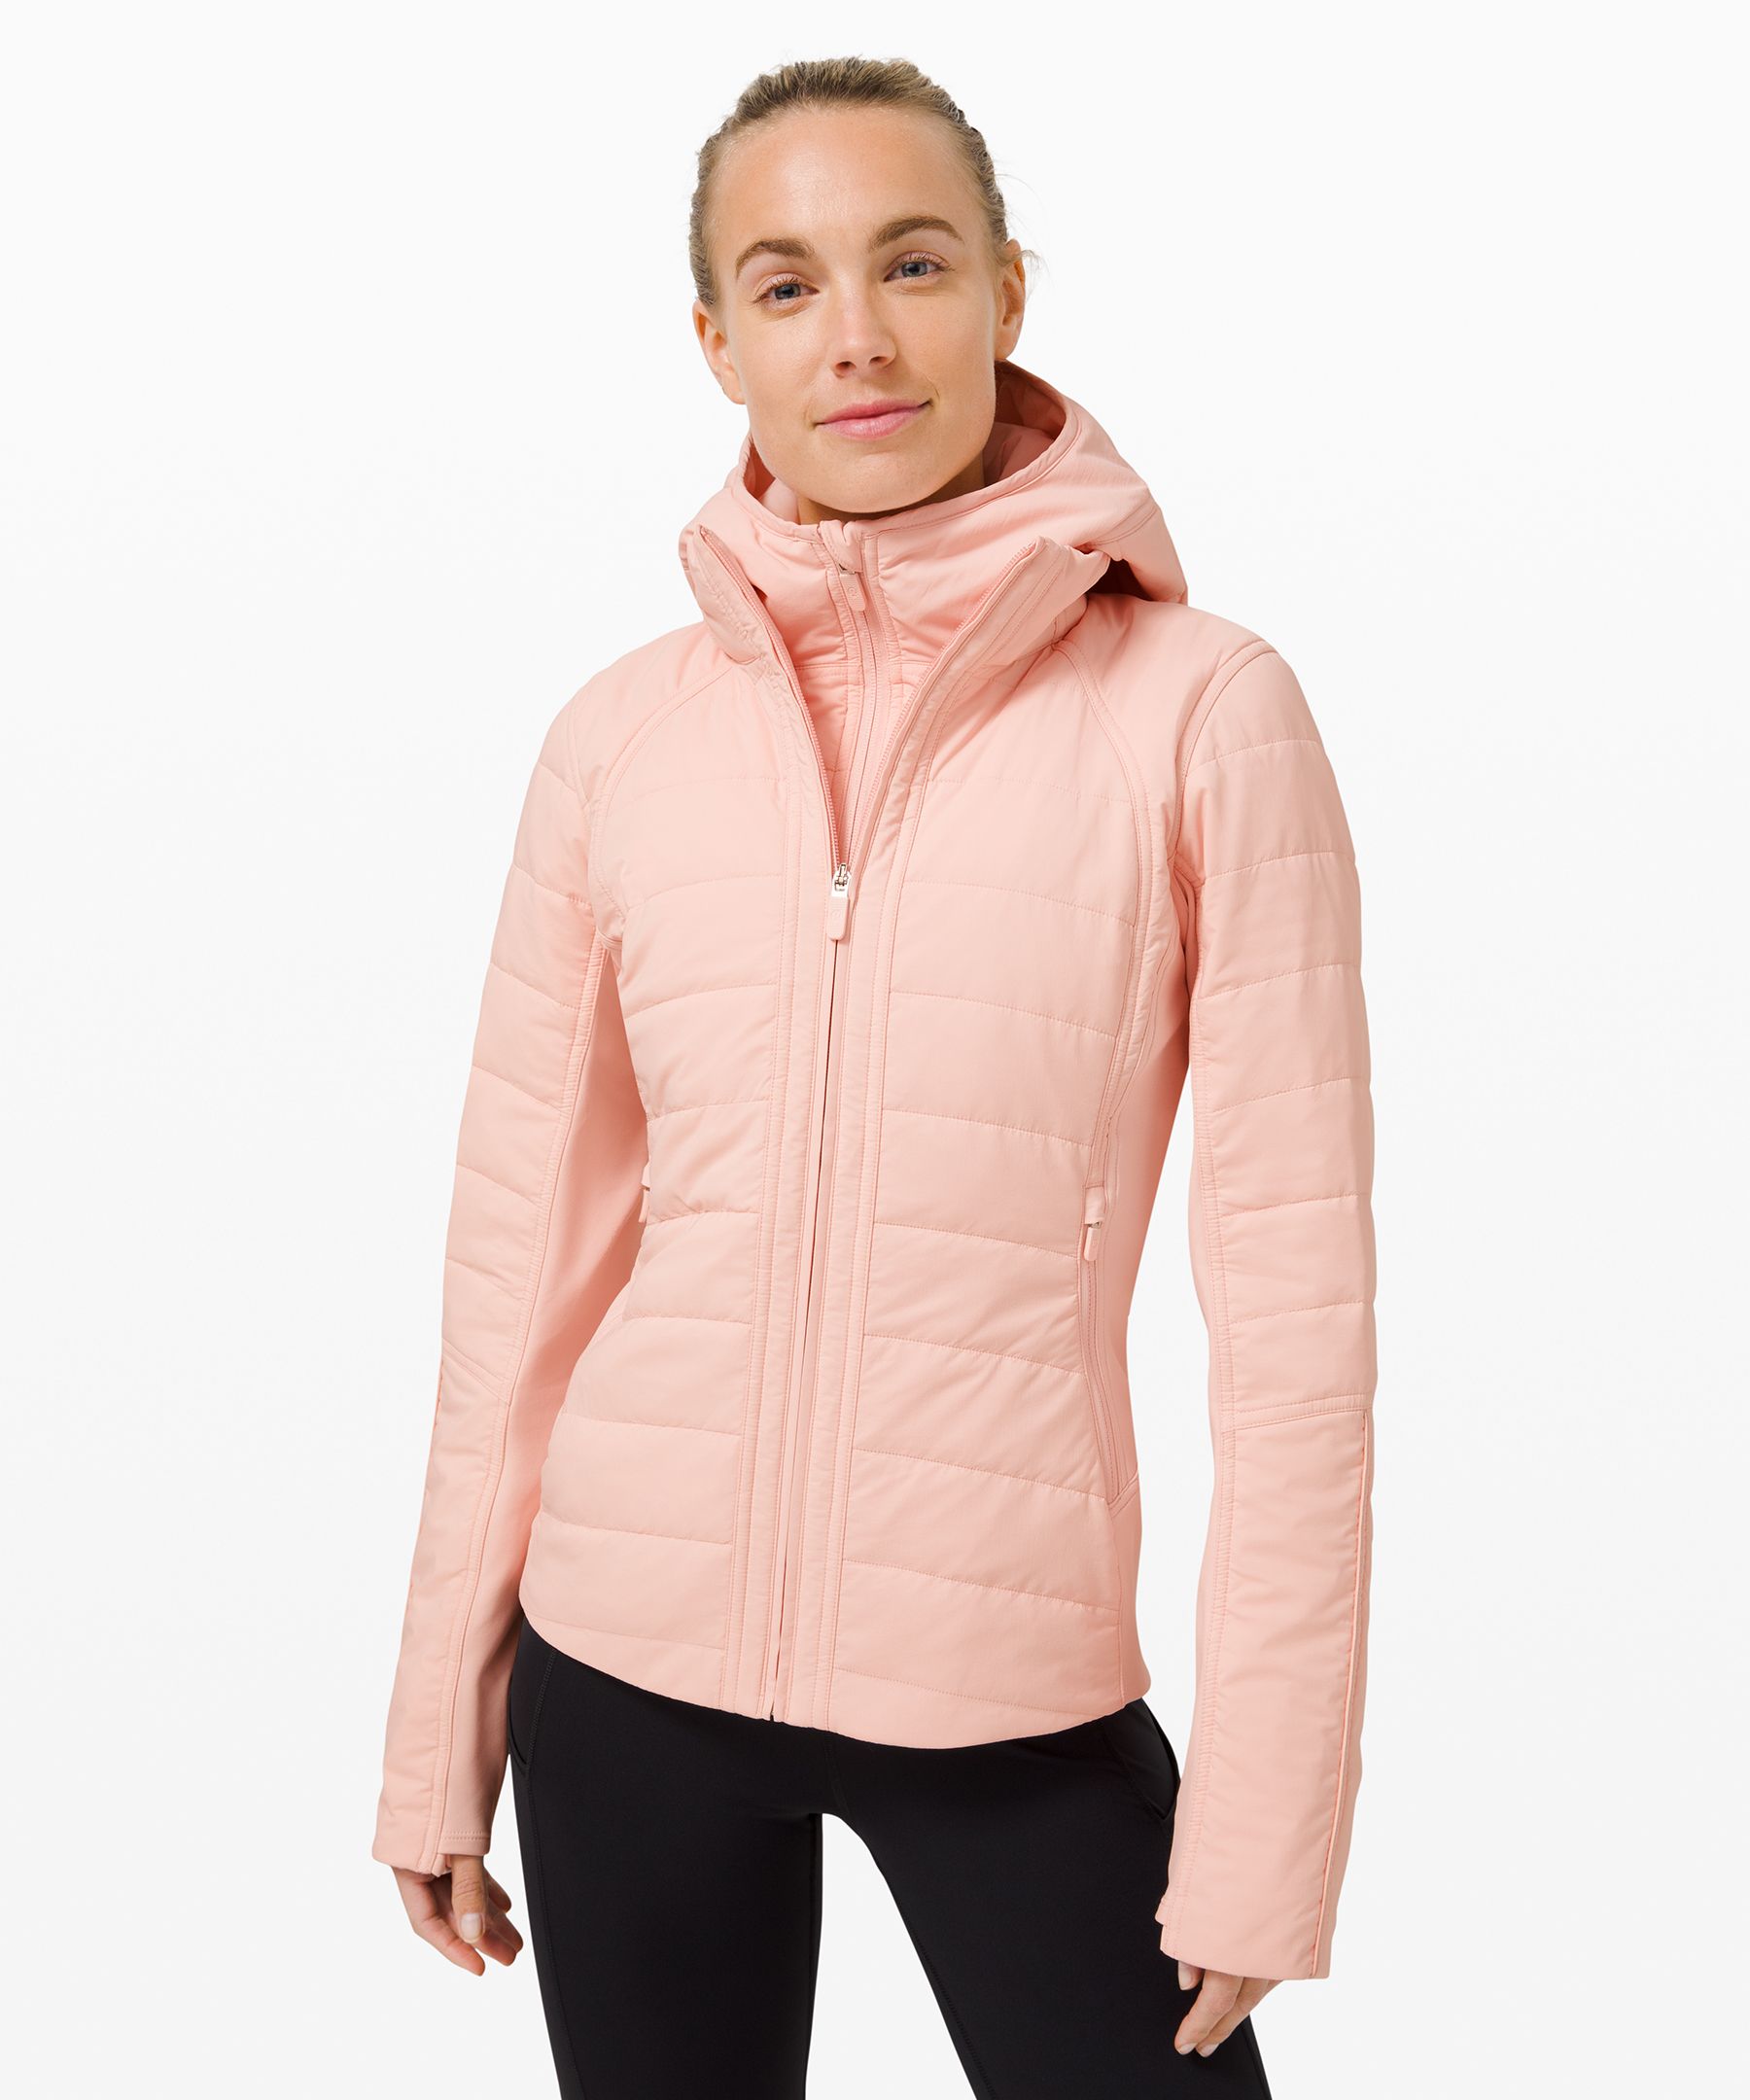 Lululemon Another Mile Jacket In Pink